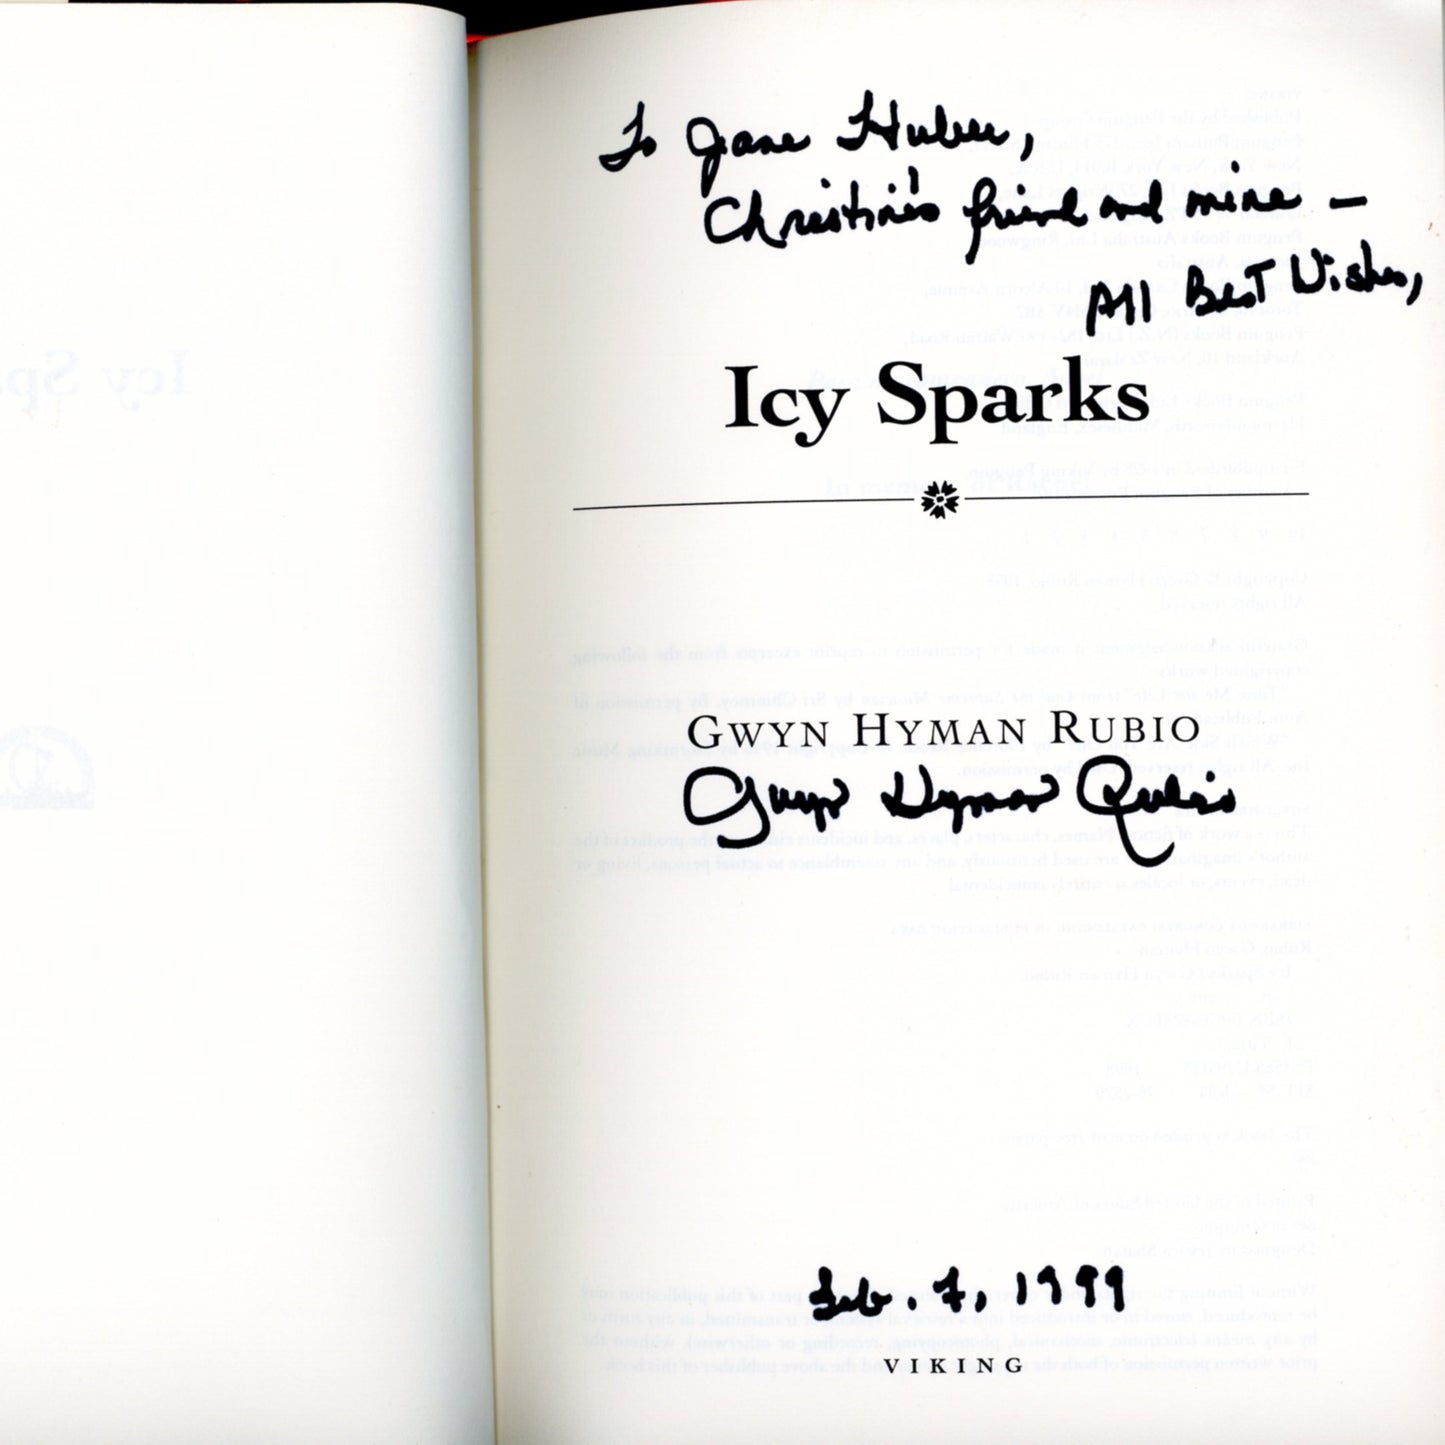 ICY SPARKS By Gwyn Hyman Rubio ©1998 First Edition Signed & Dated by Author